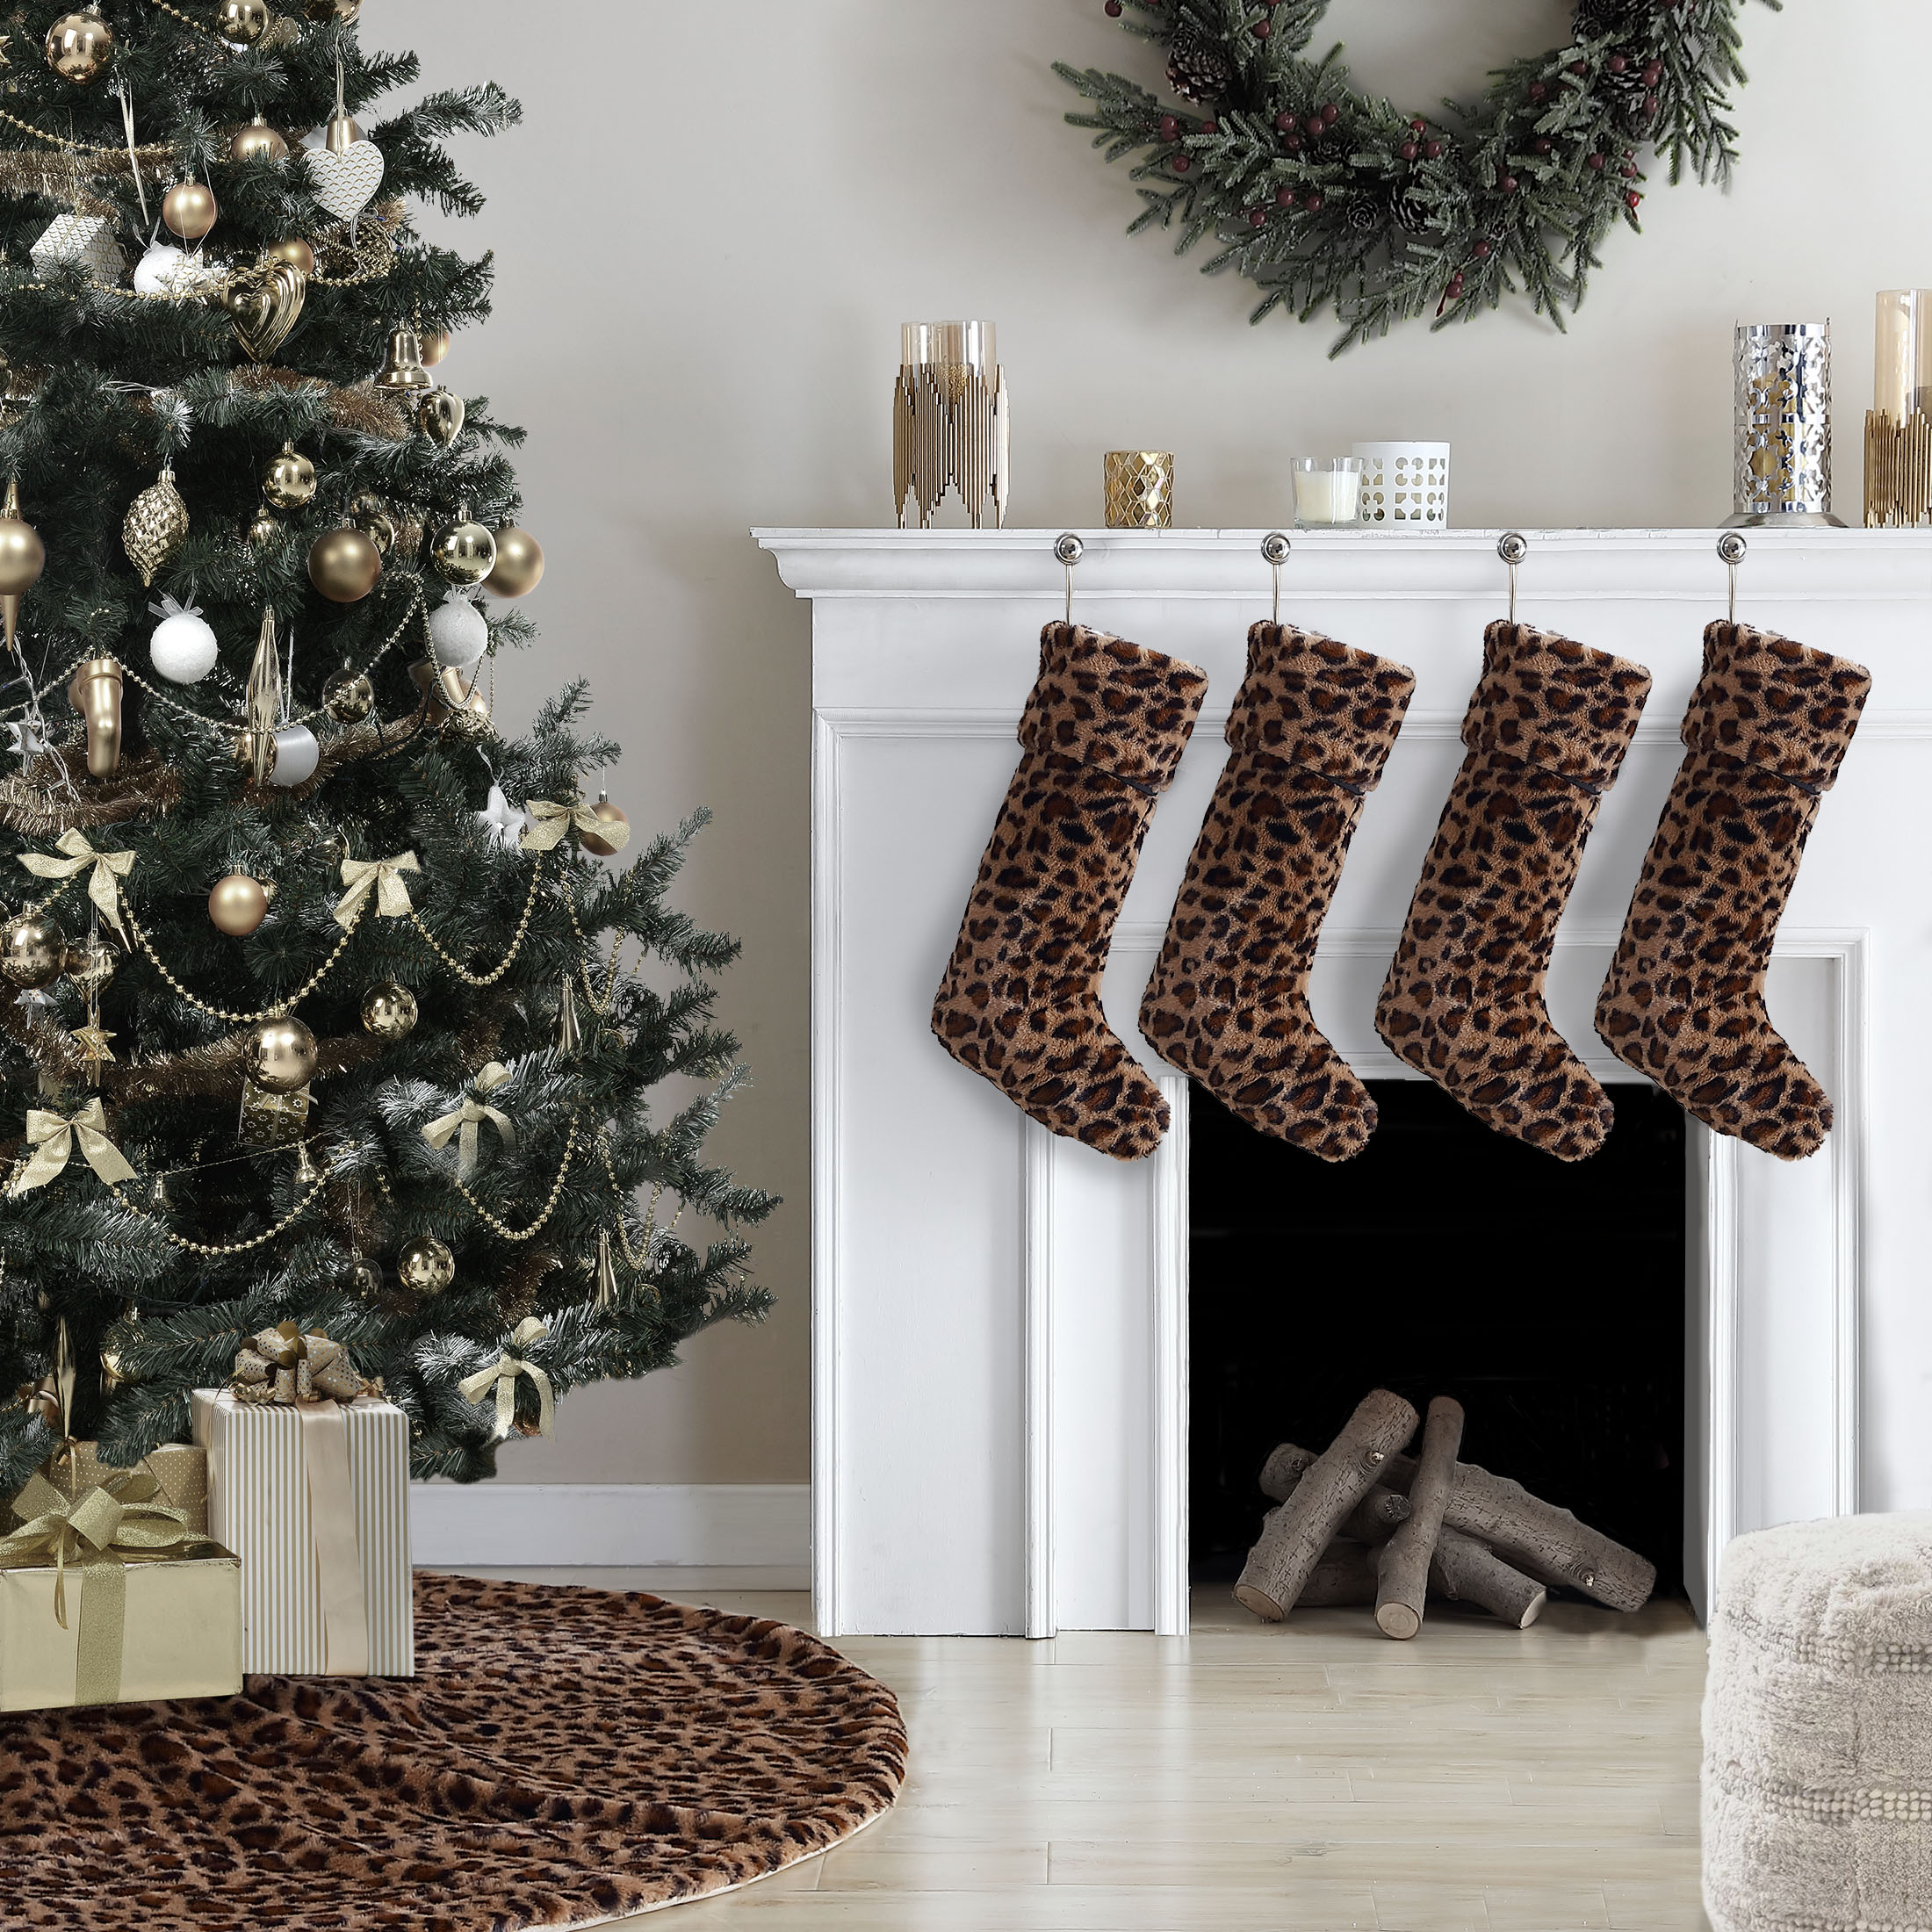 Holiday Time, Rabbit Faux Fur Leopard Print Tree Skirt, 56" - image 1 of 5